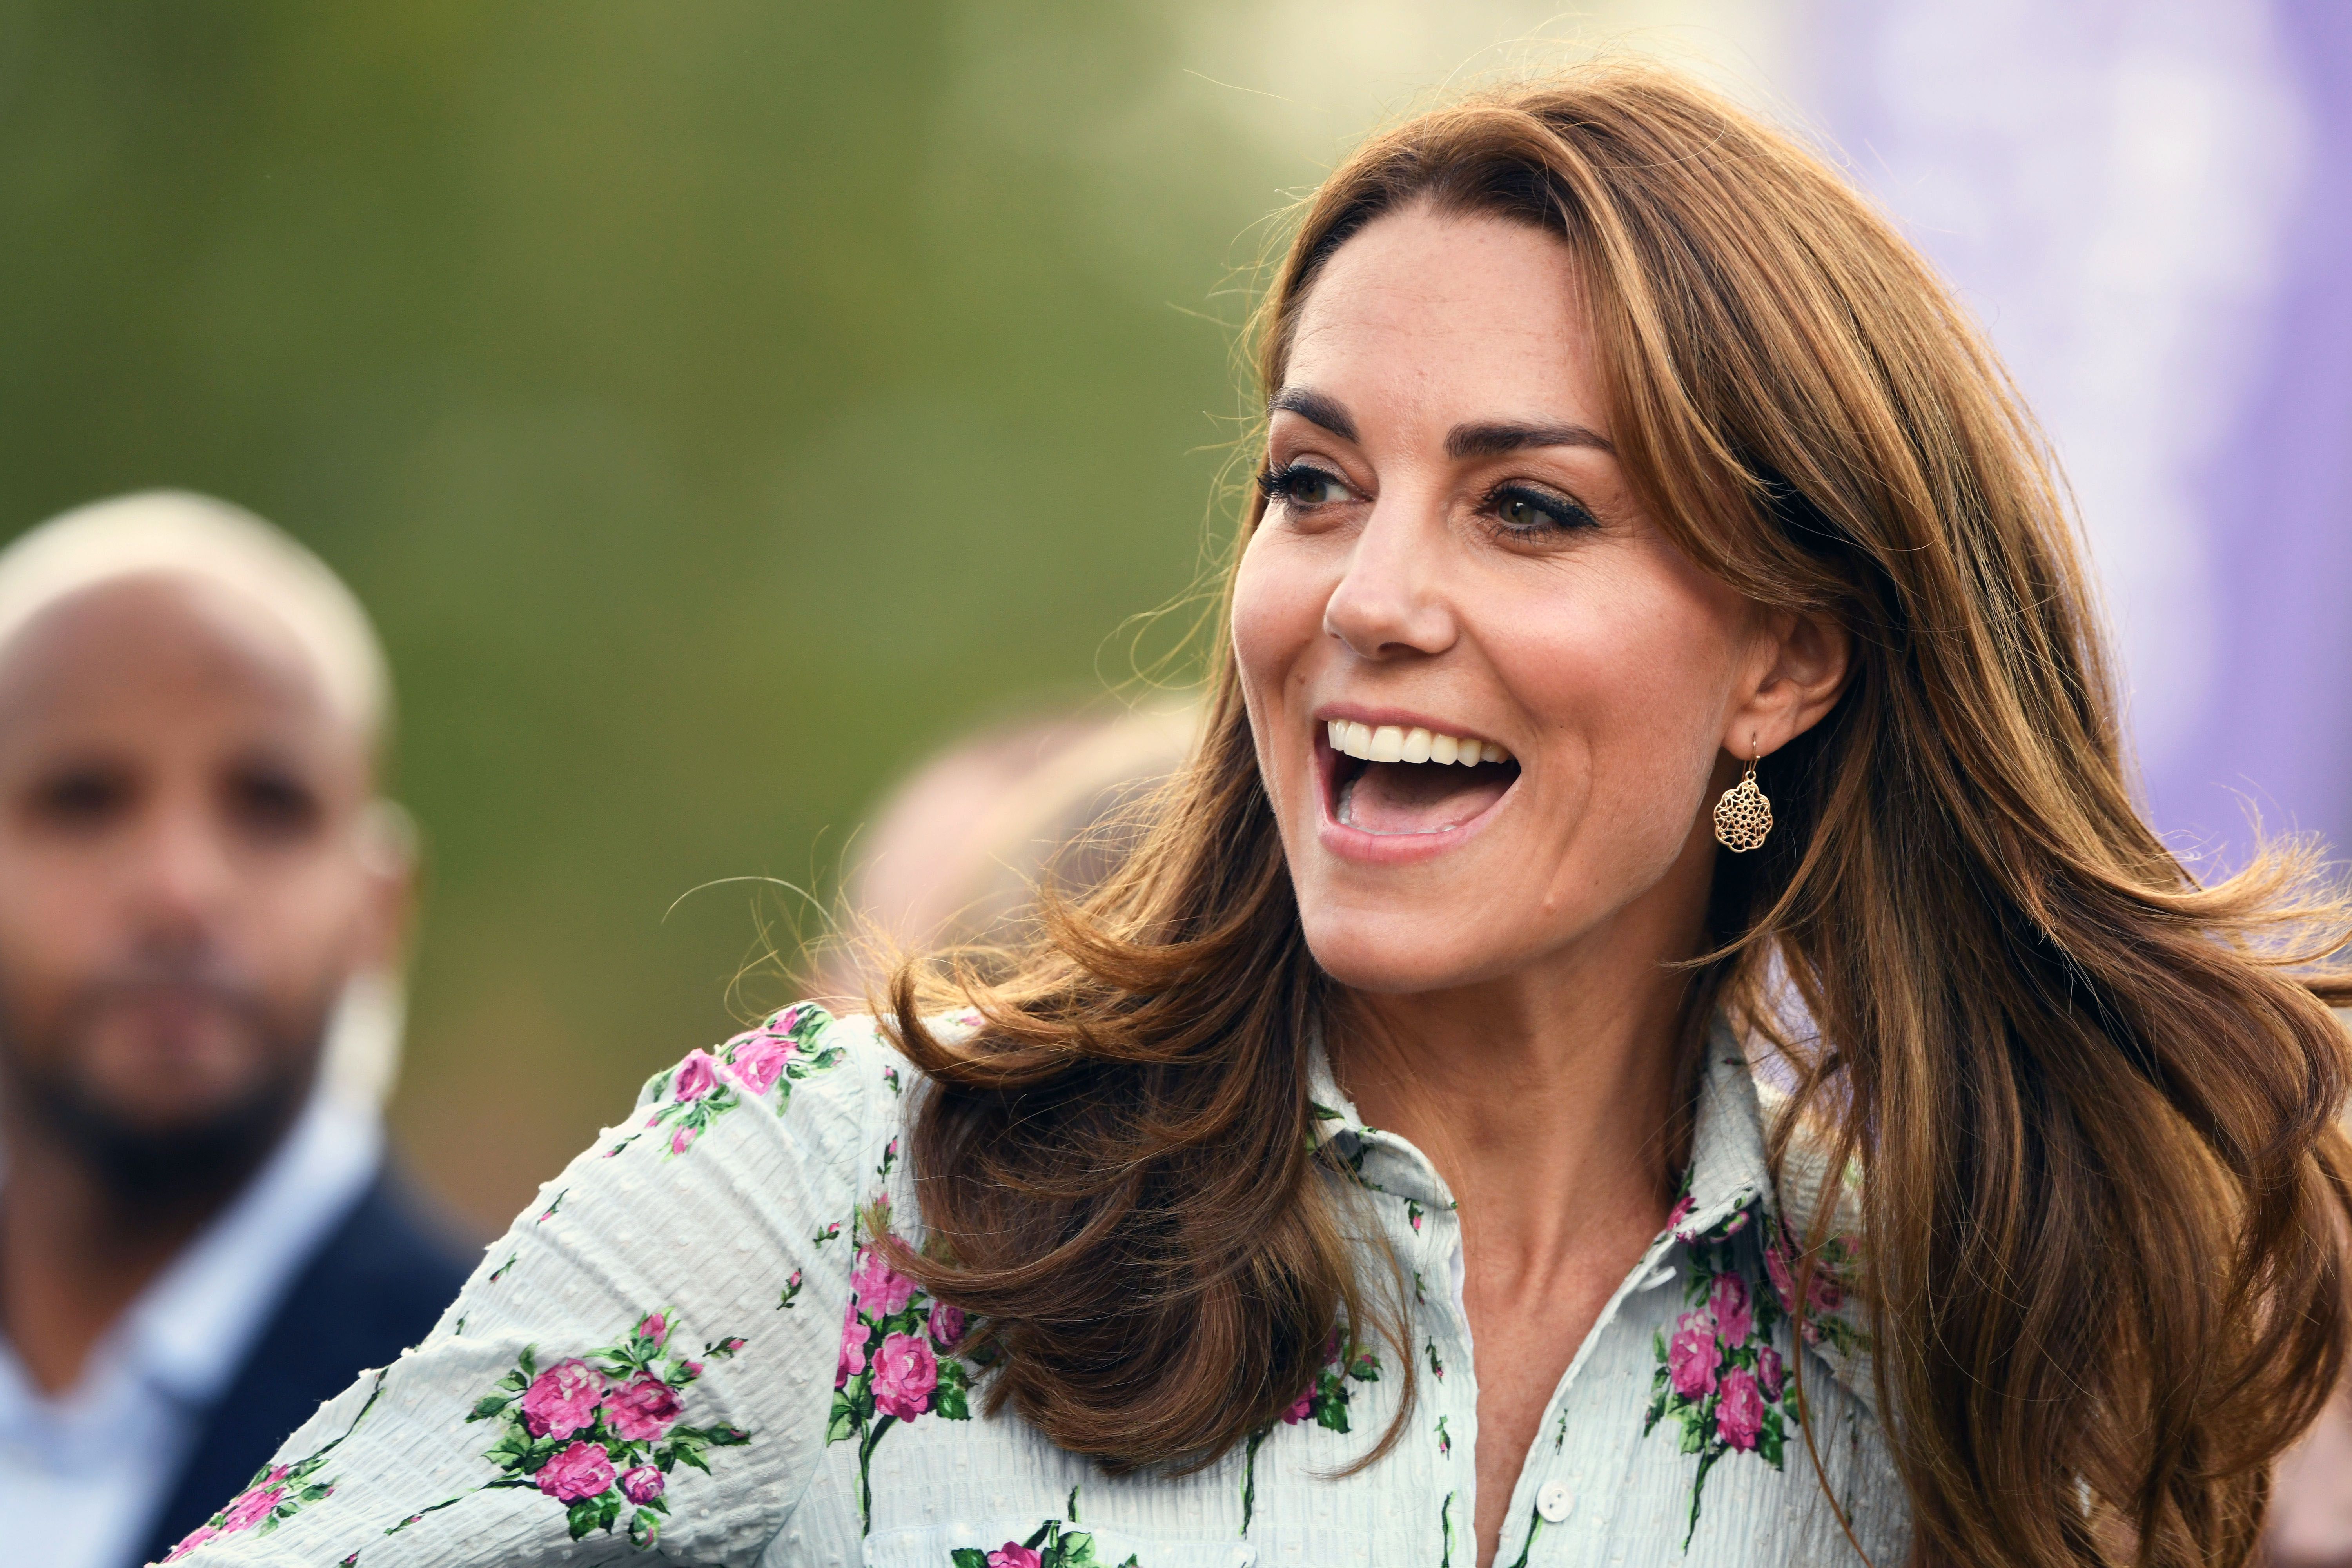 Where to get the blue earrings Kate Middleton wore in Belize  The Mail